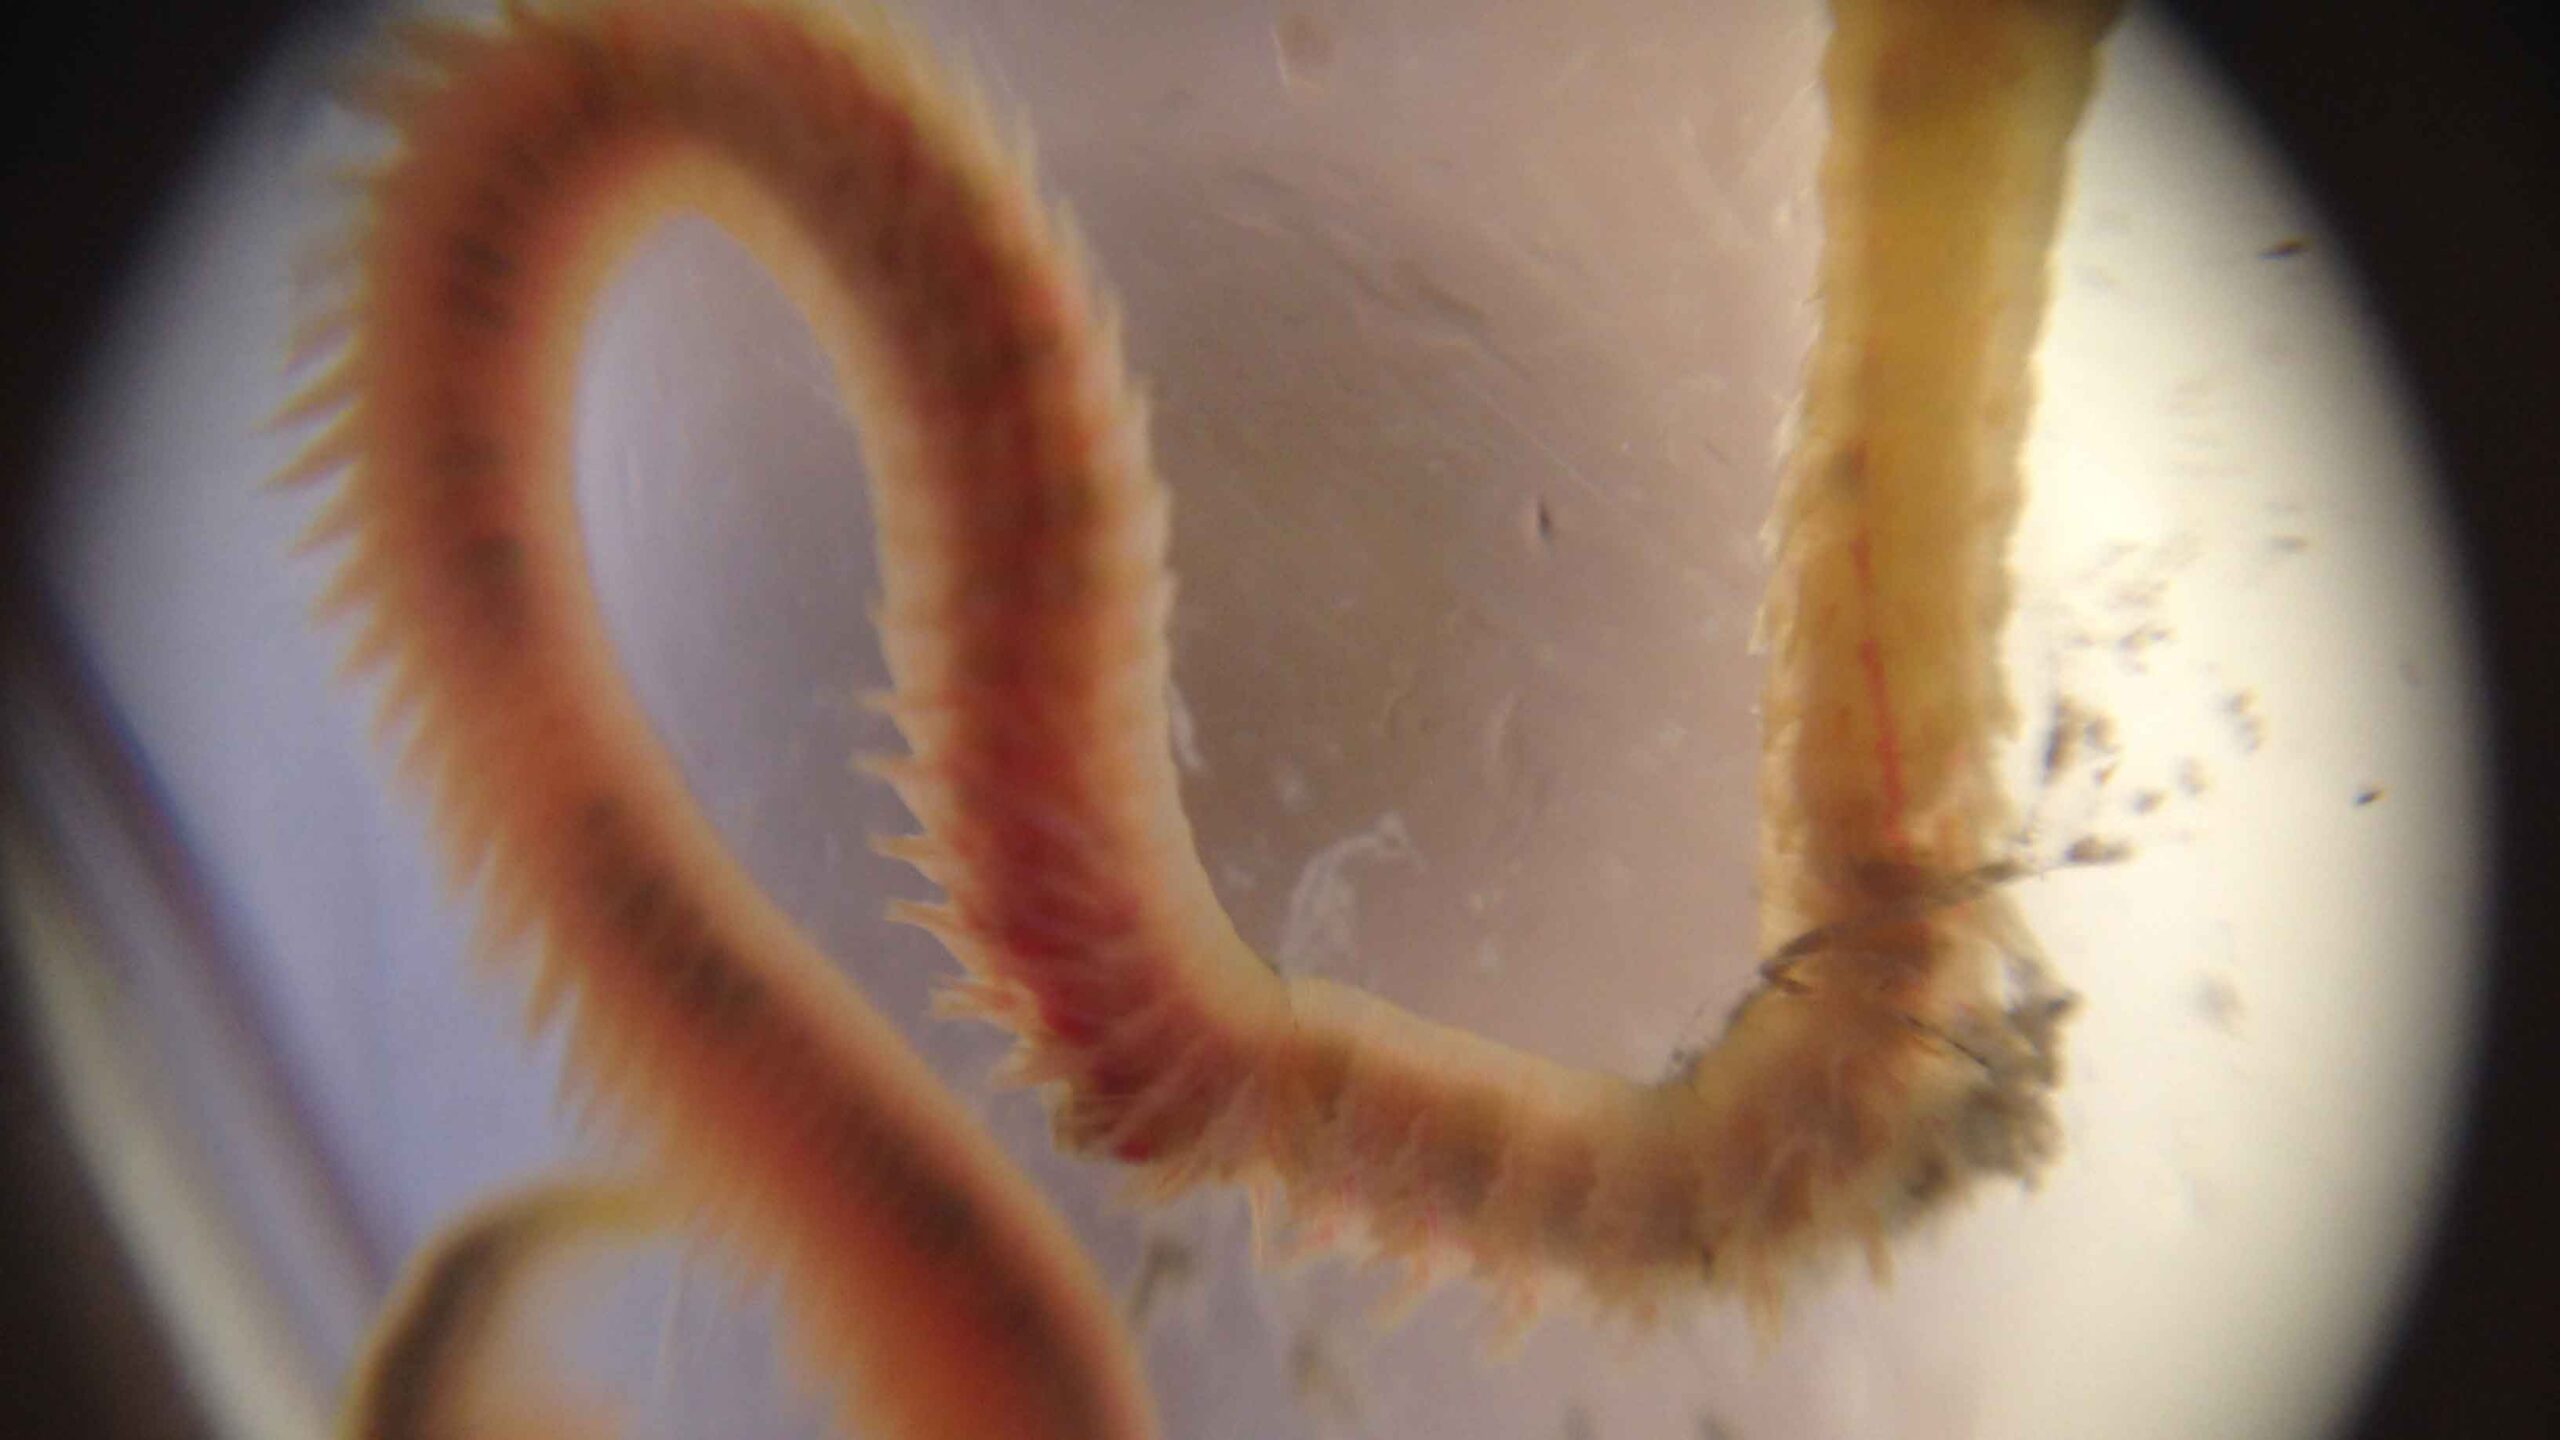 A clam worm under a microscope